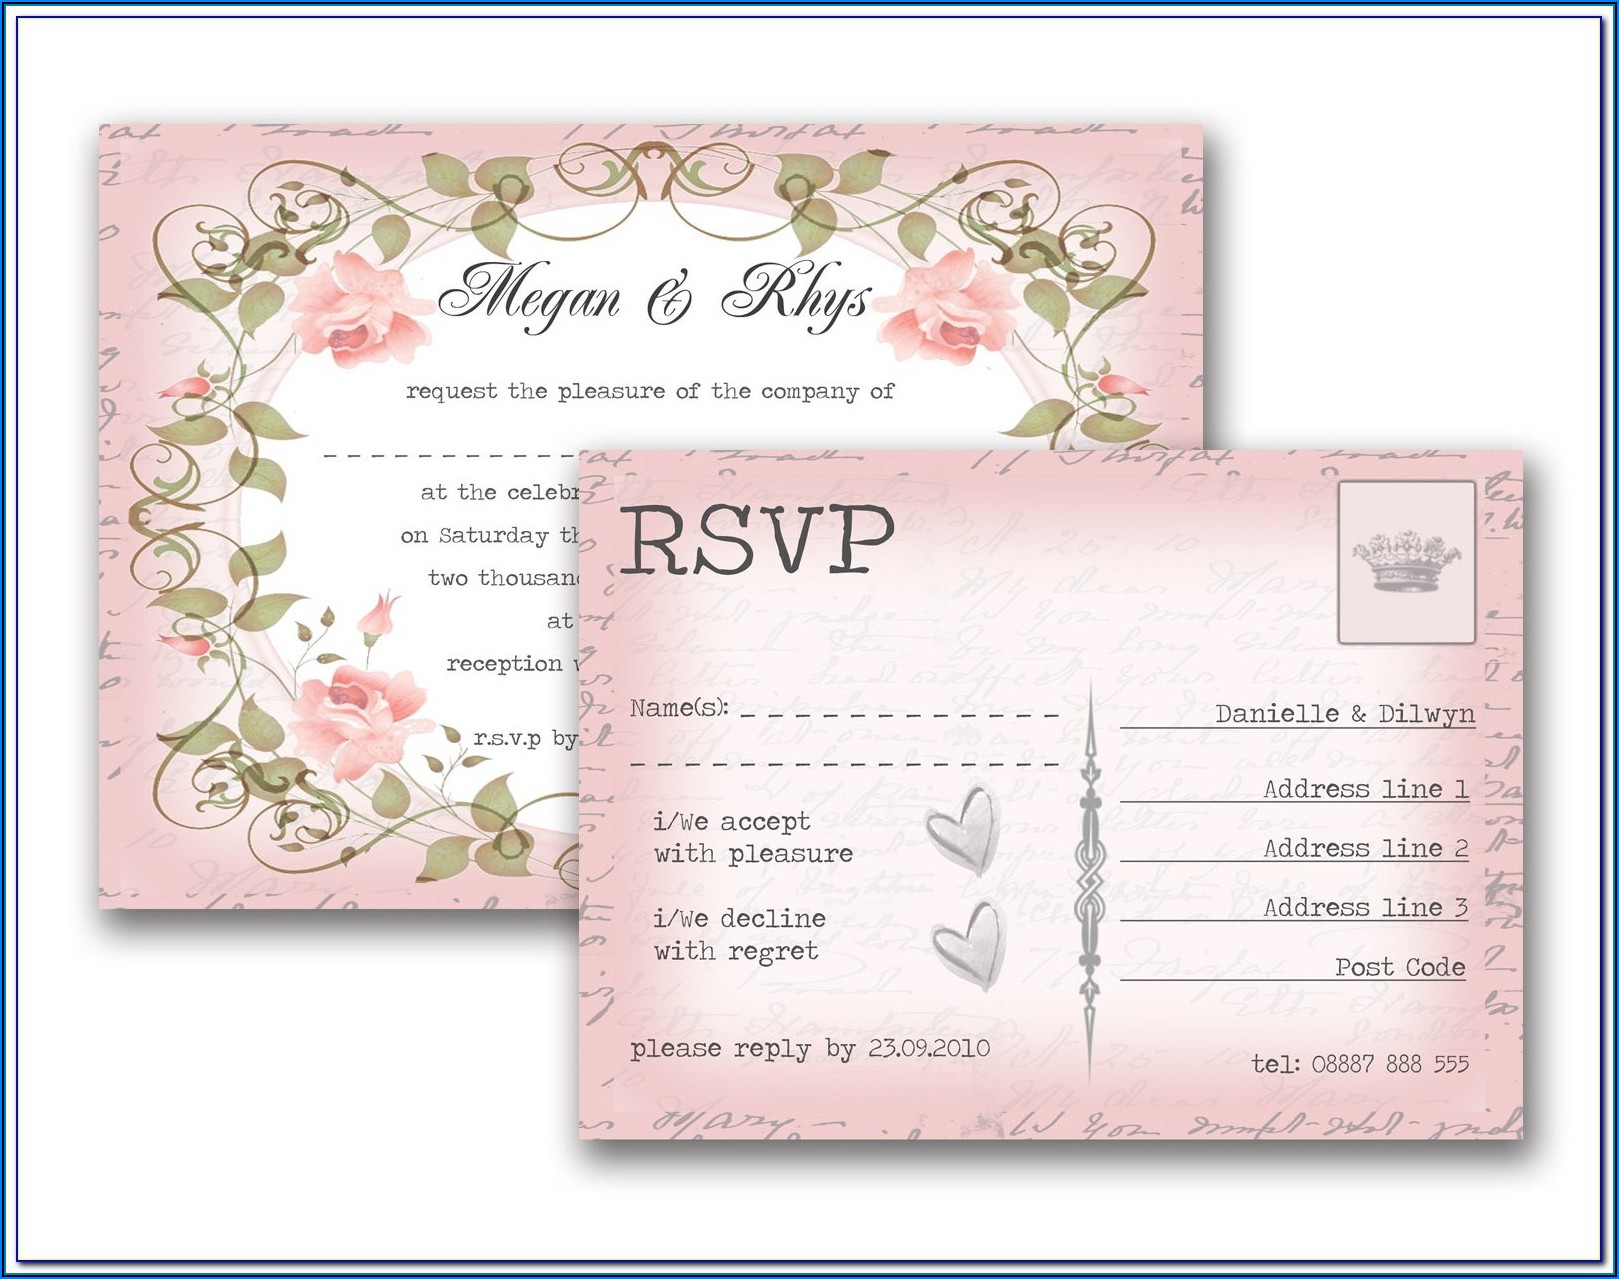 Rsvp Means In Wedding Cards